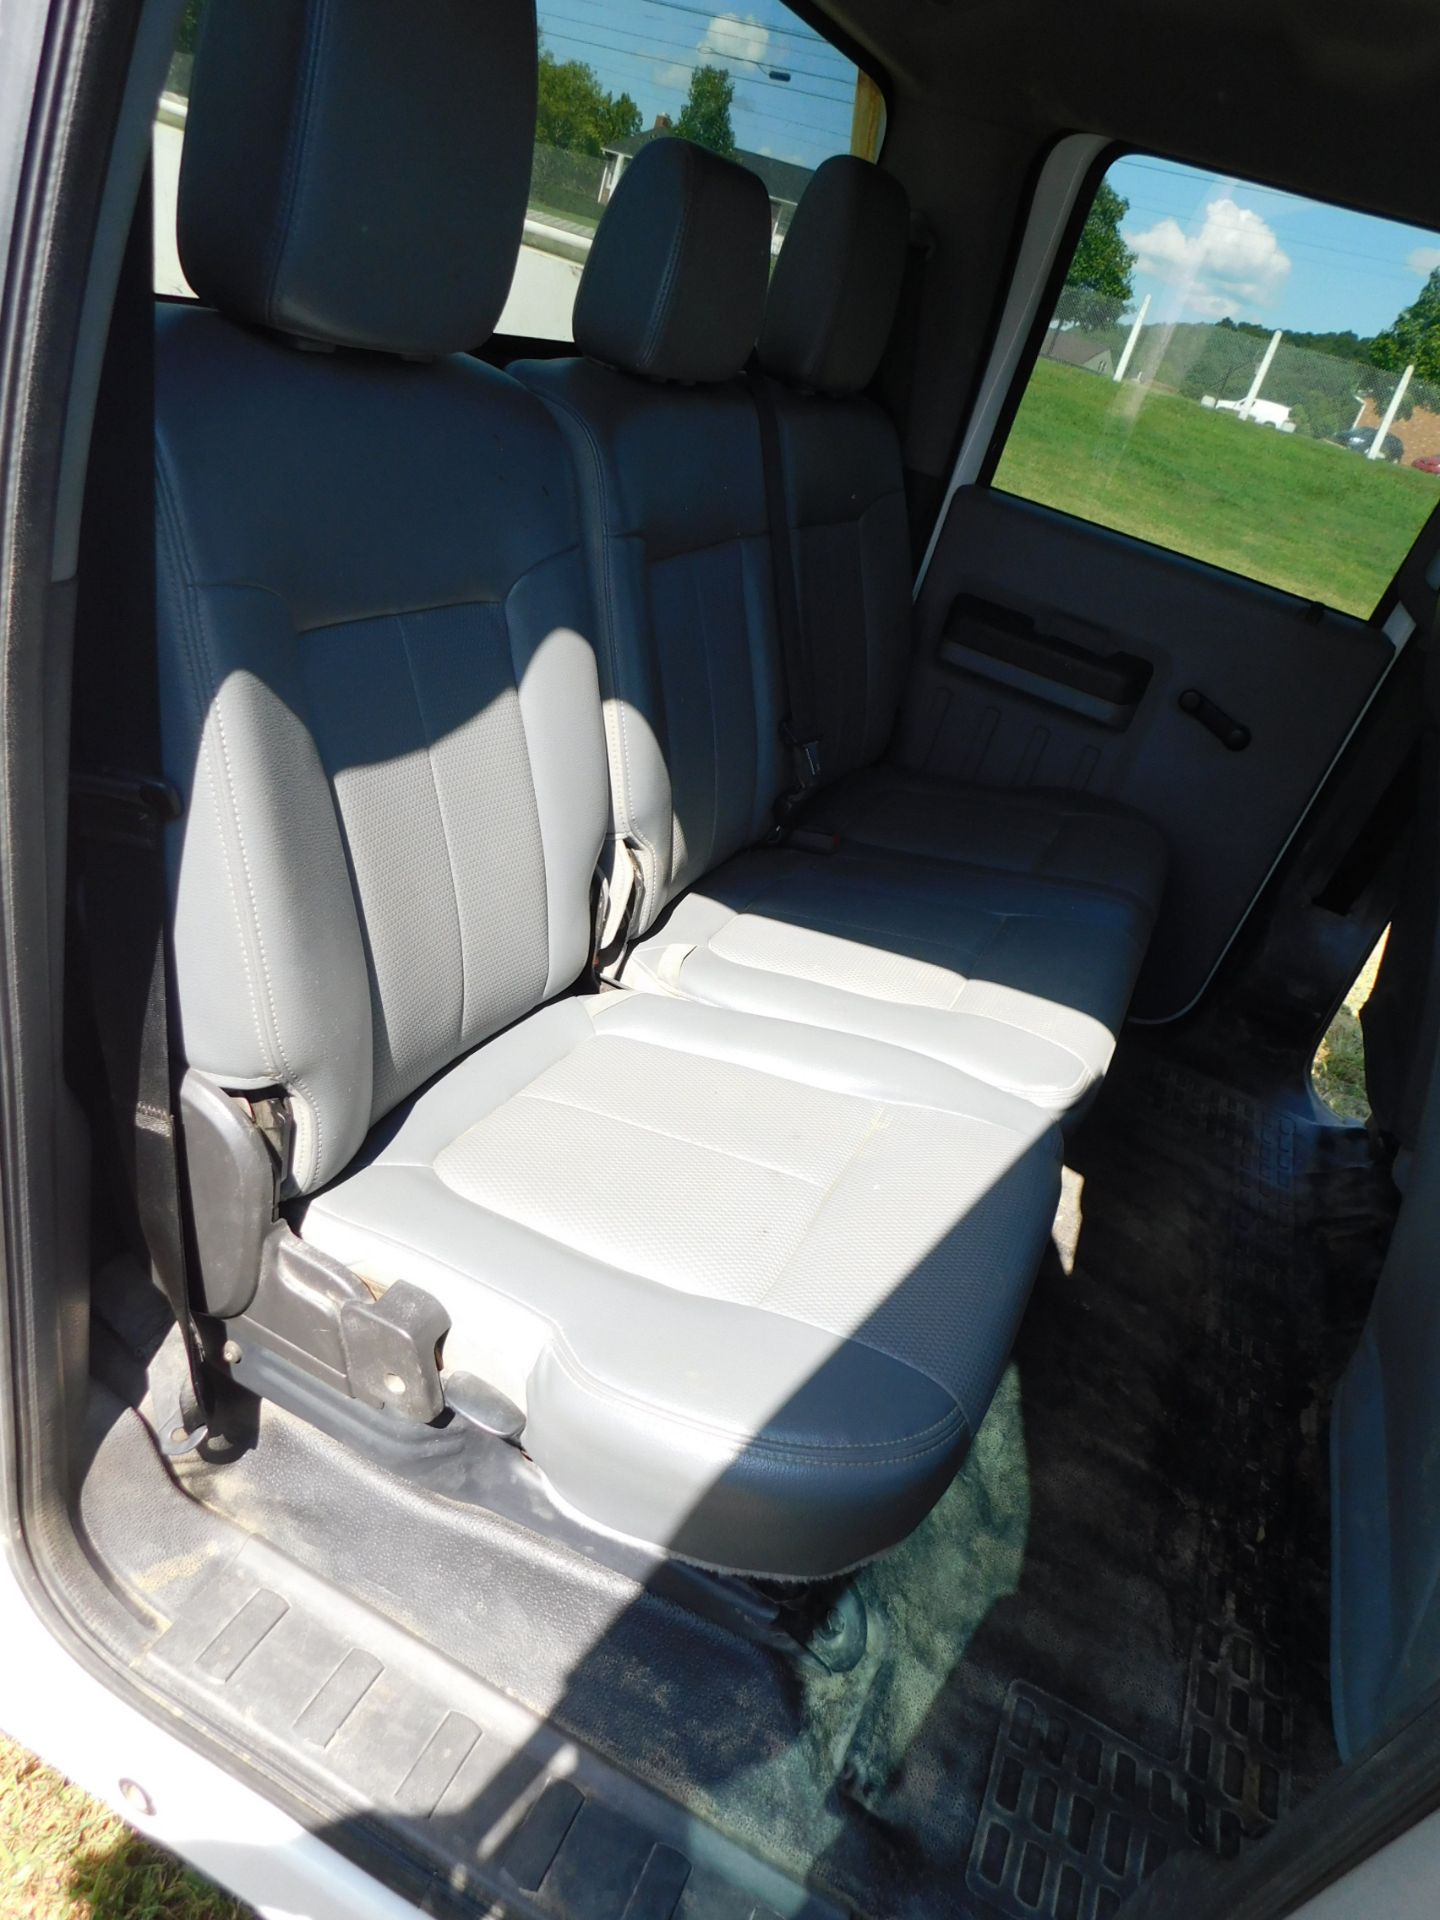 2013 Ford F250 Super Duty Service Truck, Crew Cab, Royal 8' Utility Bed, 4 WD, 153,573 Miles, AC, - Image 42 of 47